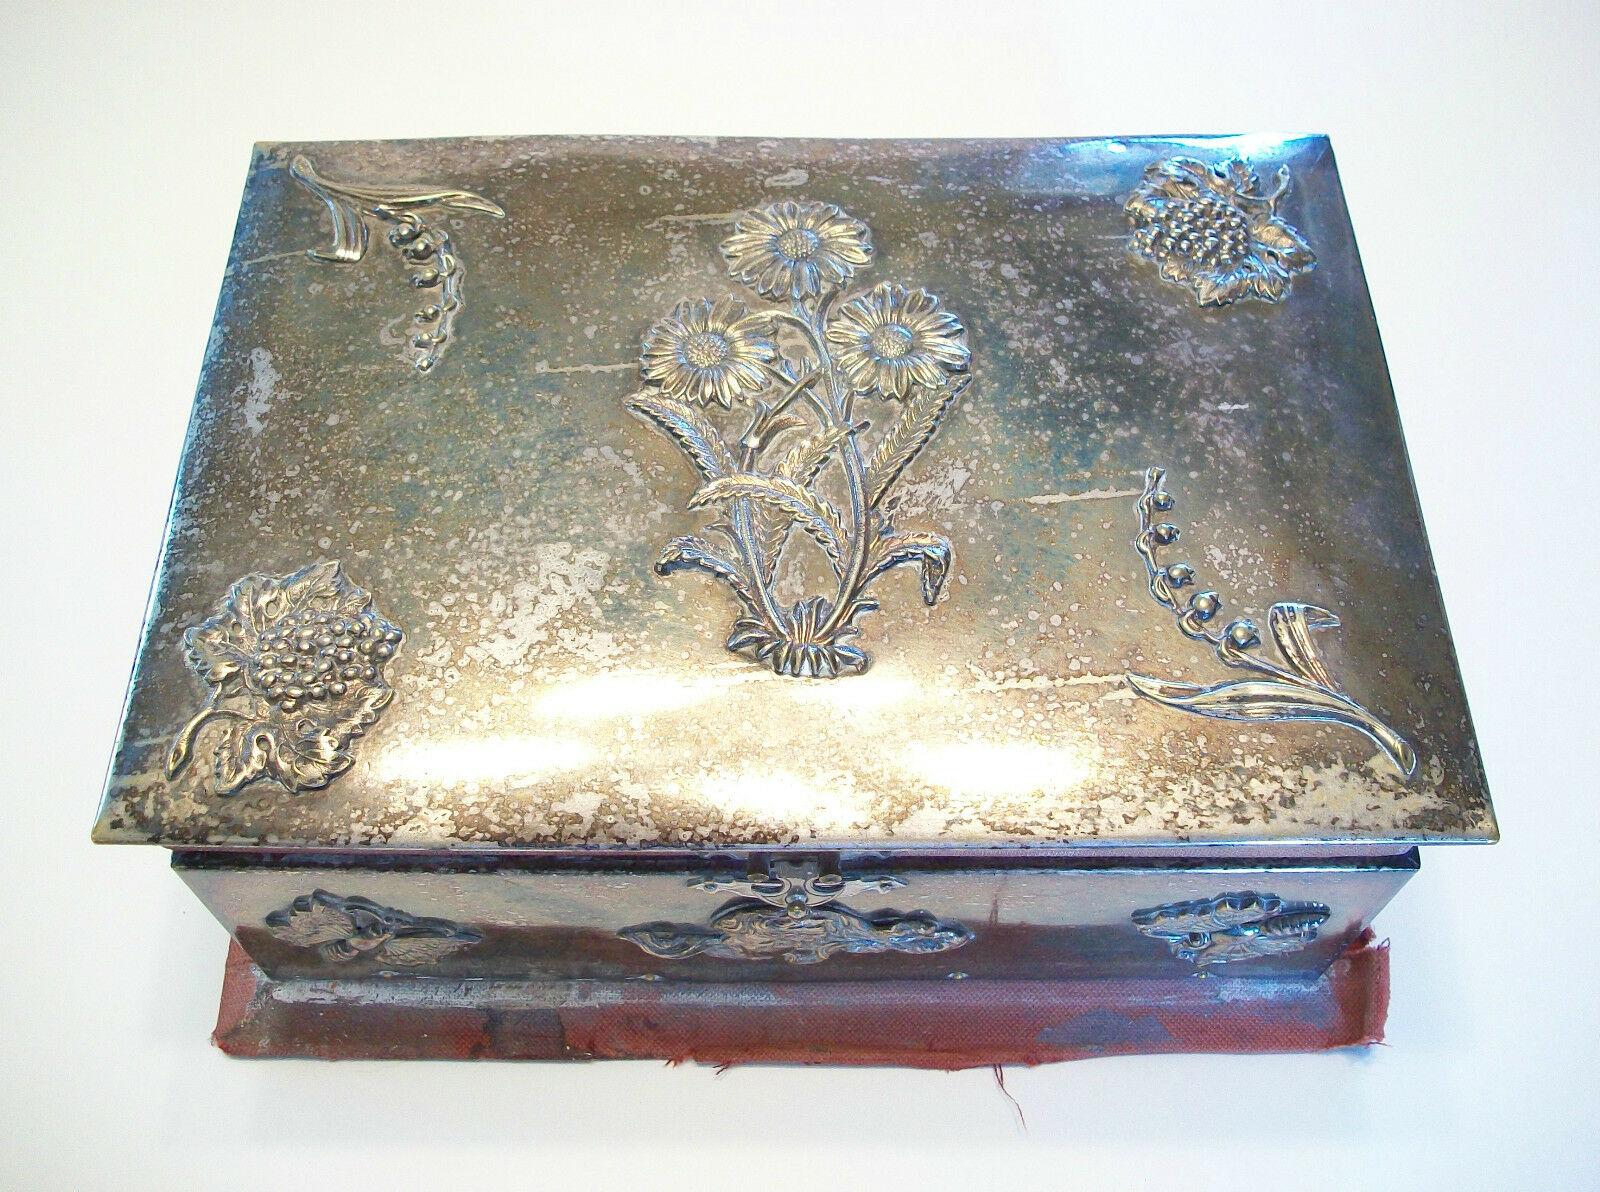 British Arts & Crafts Jewelry Box with Applied Decoration - Unsigned - U K - Circa 1880 For Sale